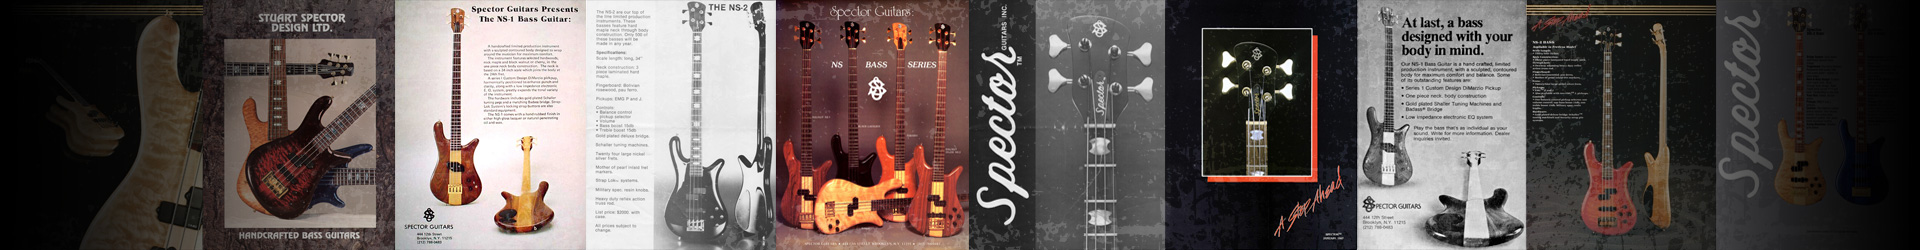 banner of history of Spector basses